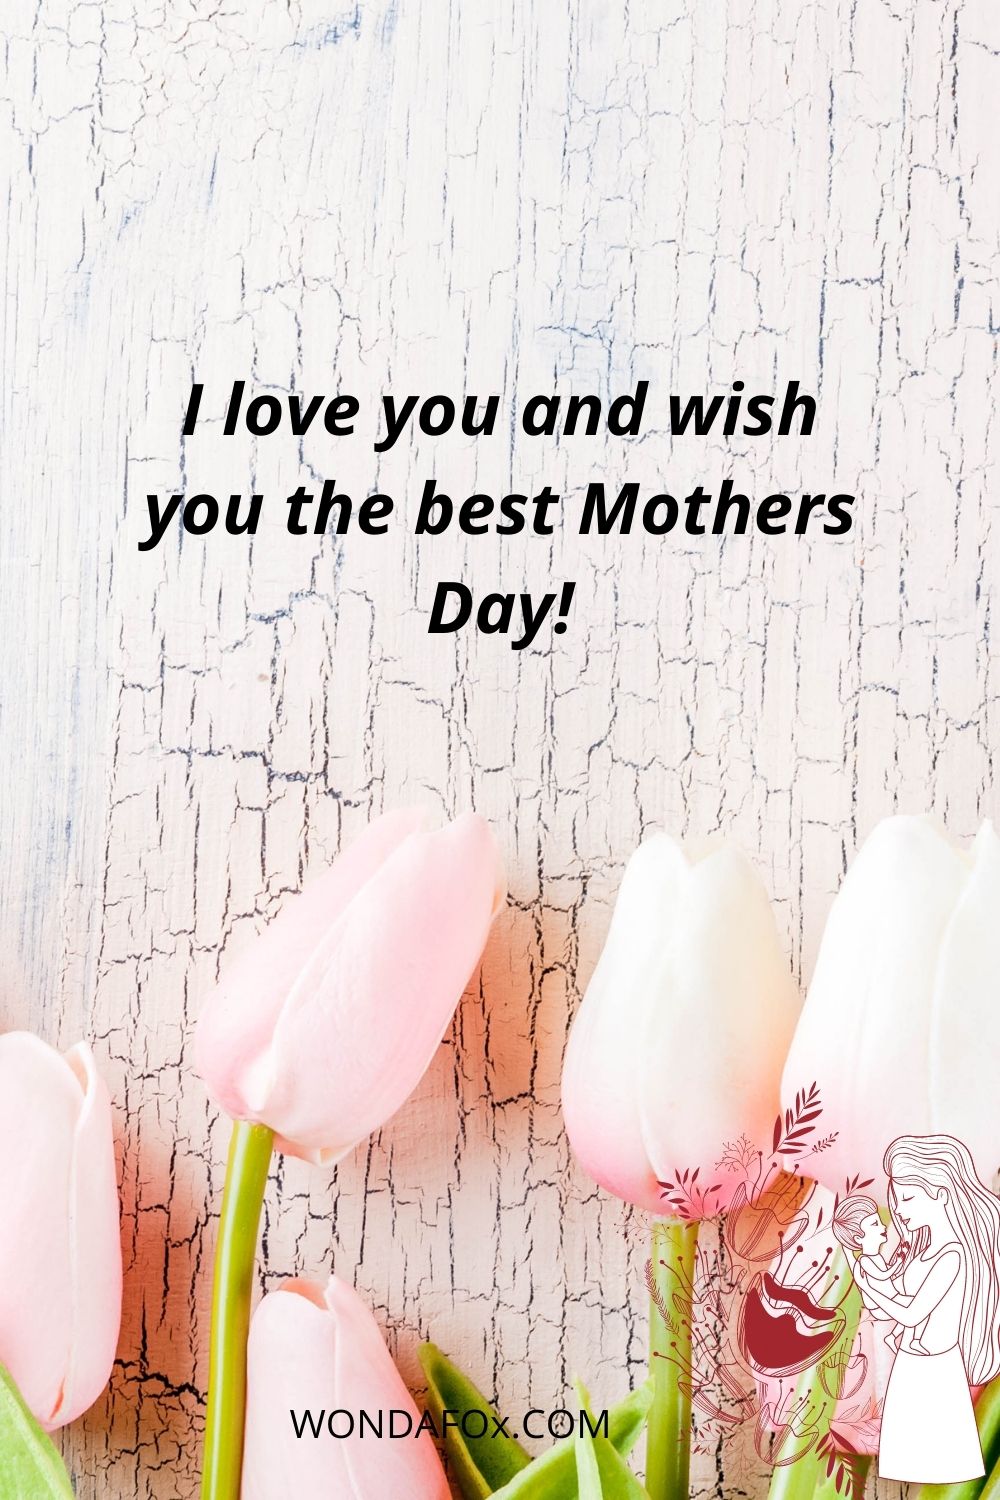 I love you and wish you the best Mothers Day!